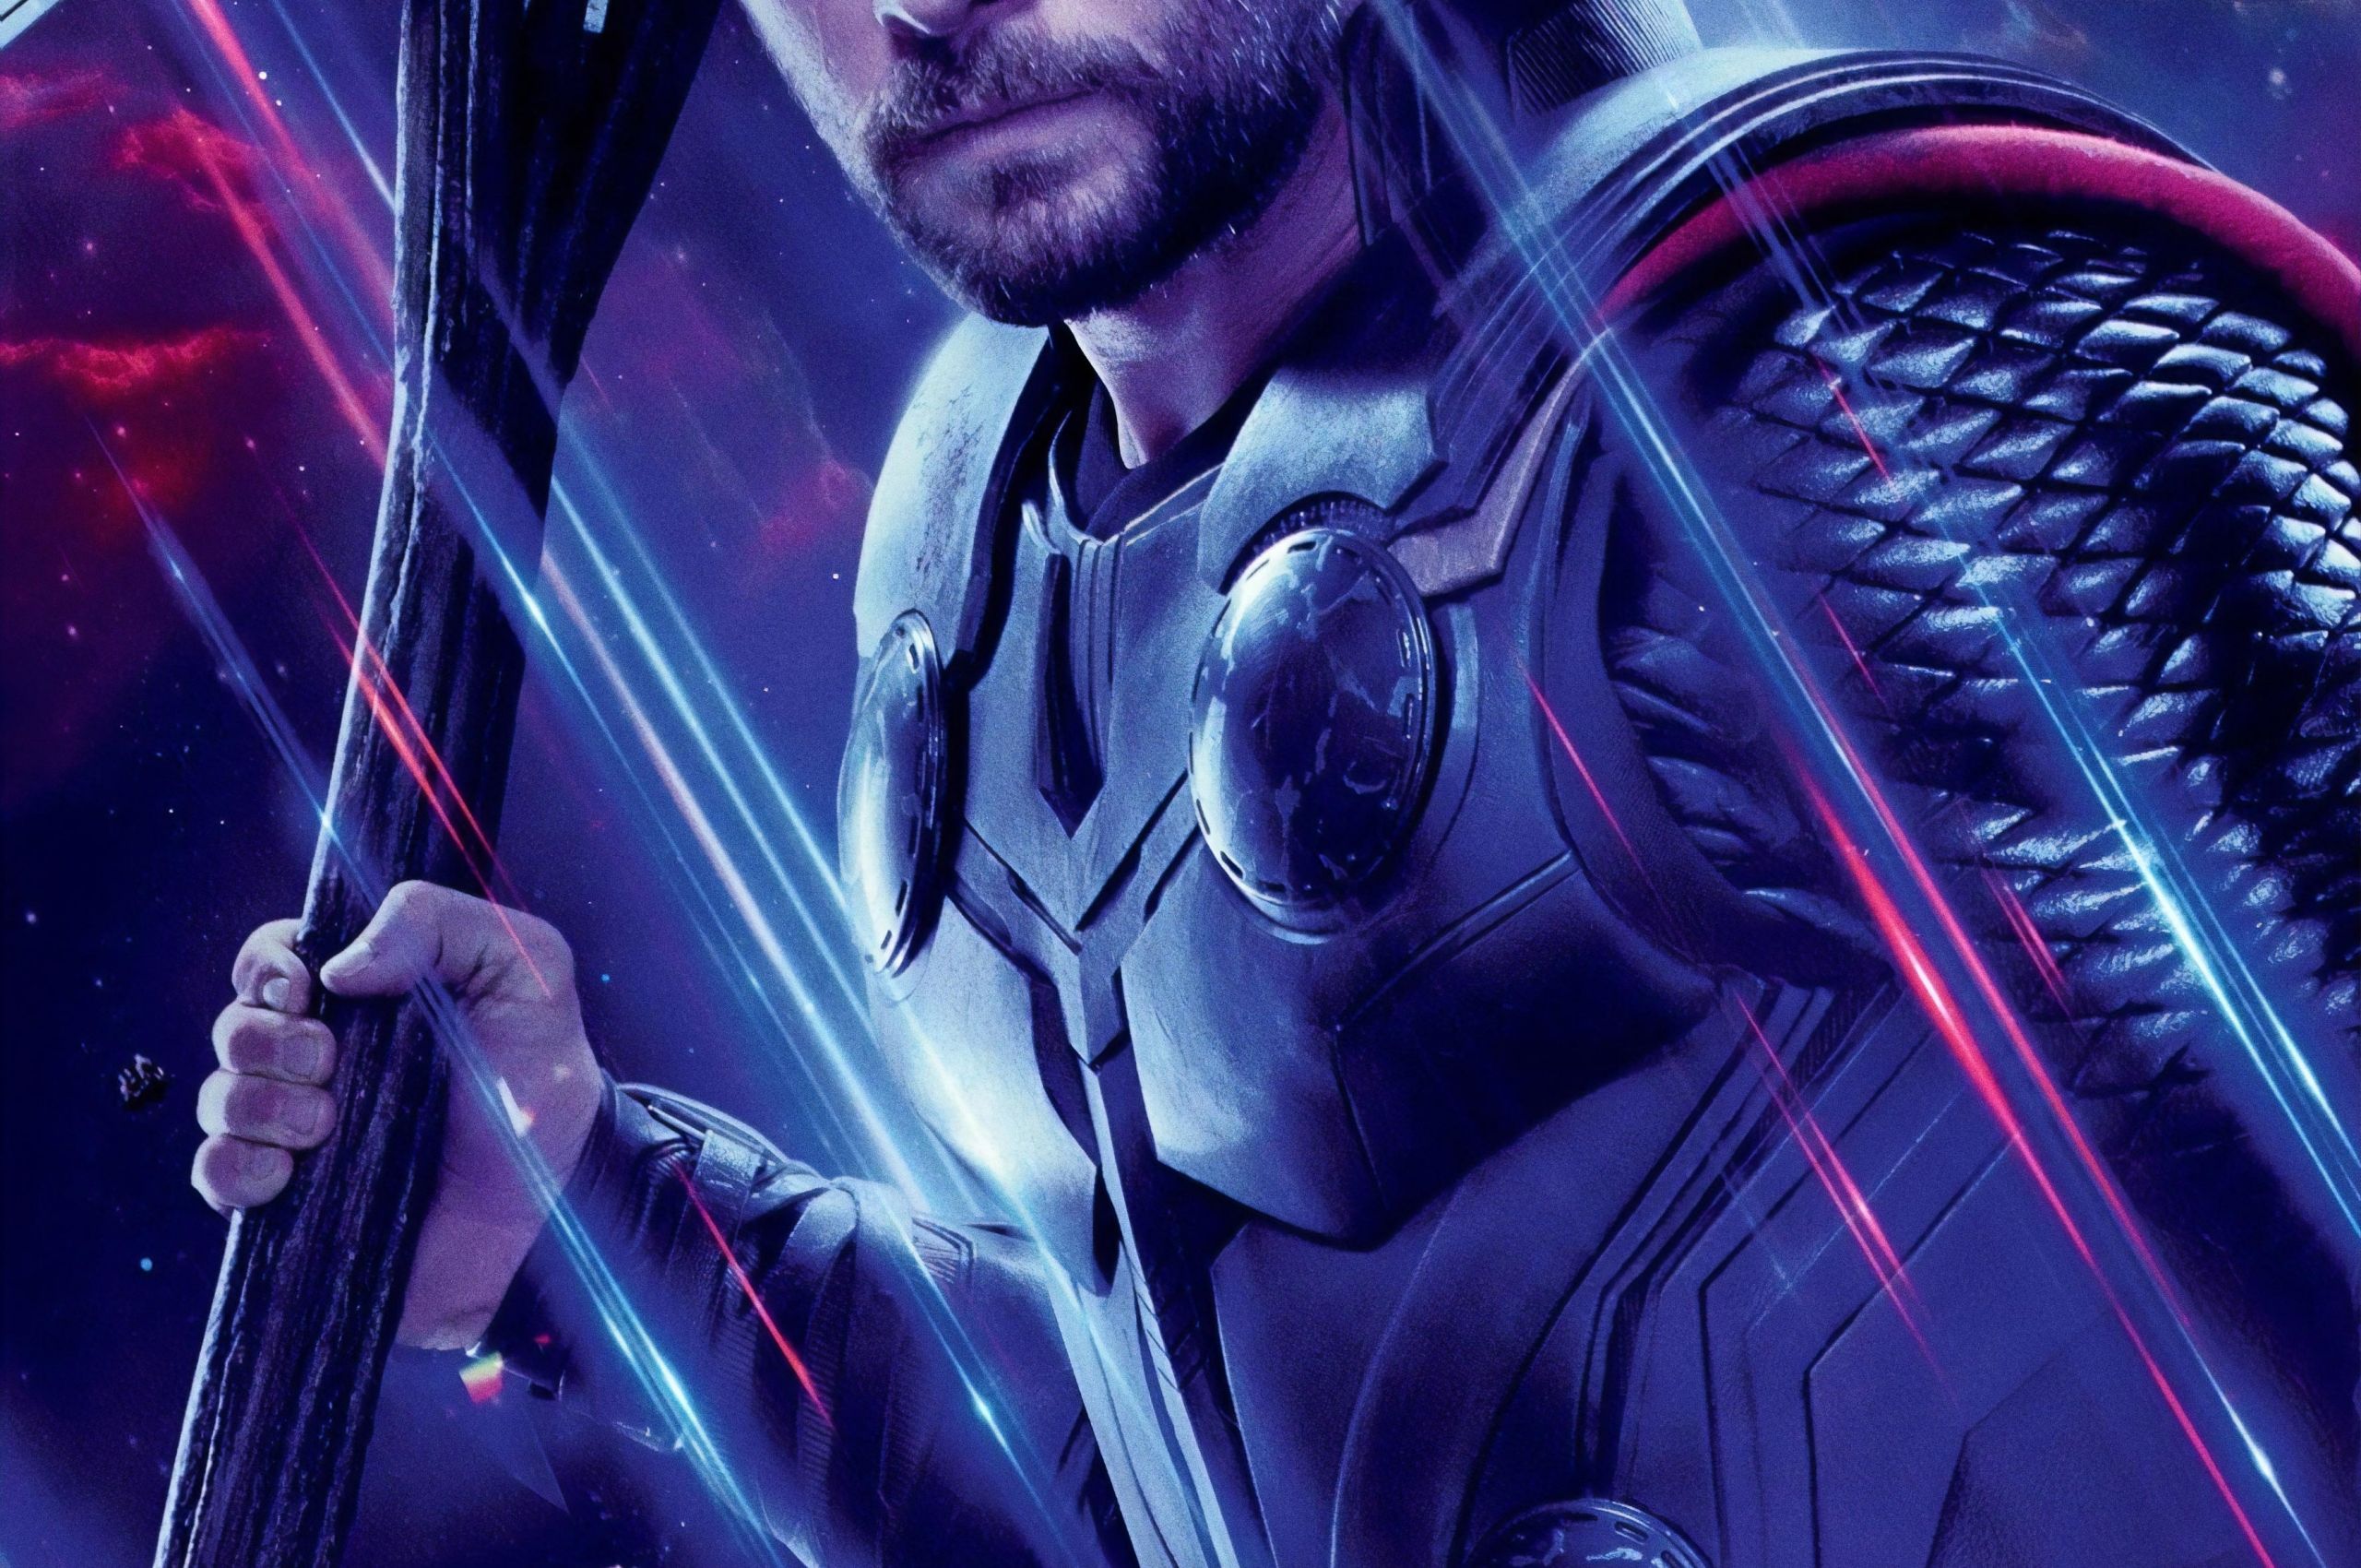 Free download Thor in Avengers Endgame Wallpaper HD Movies 4K